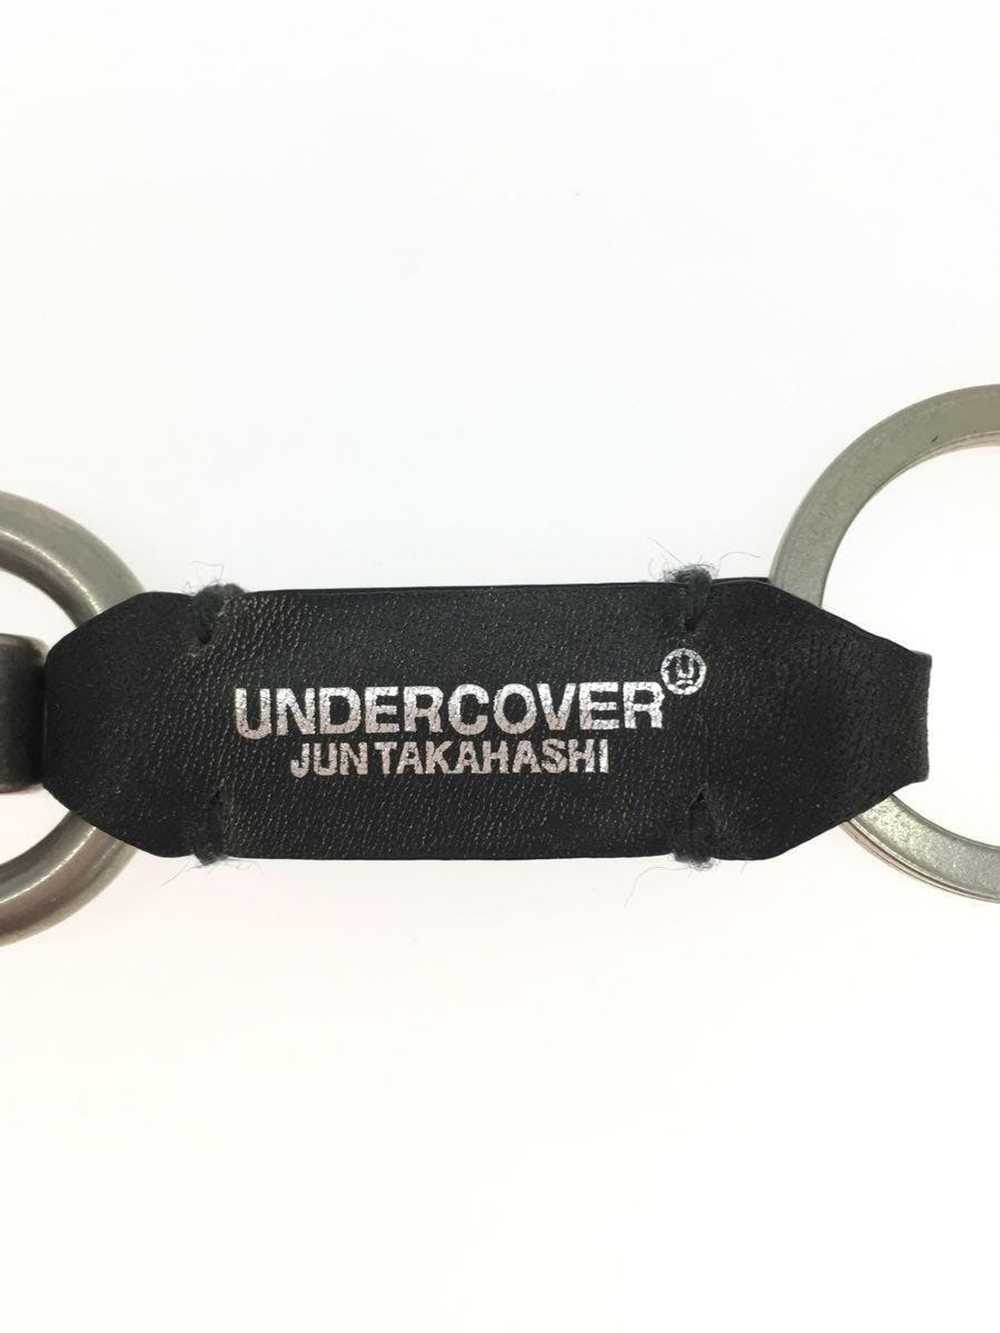 Undercover Logo Leather Carabiner Keychain - image 3